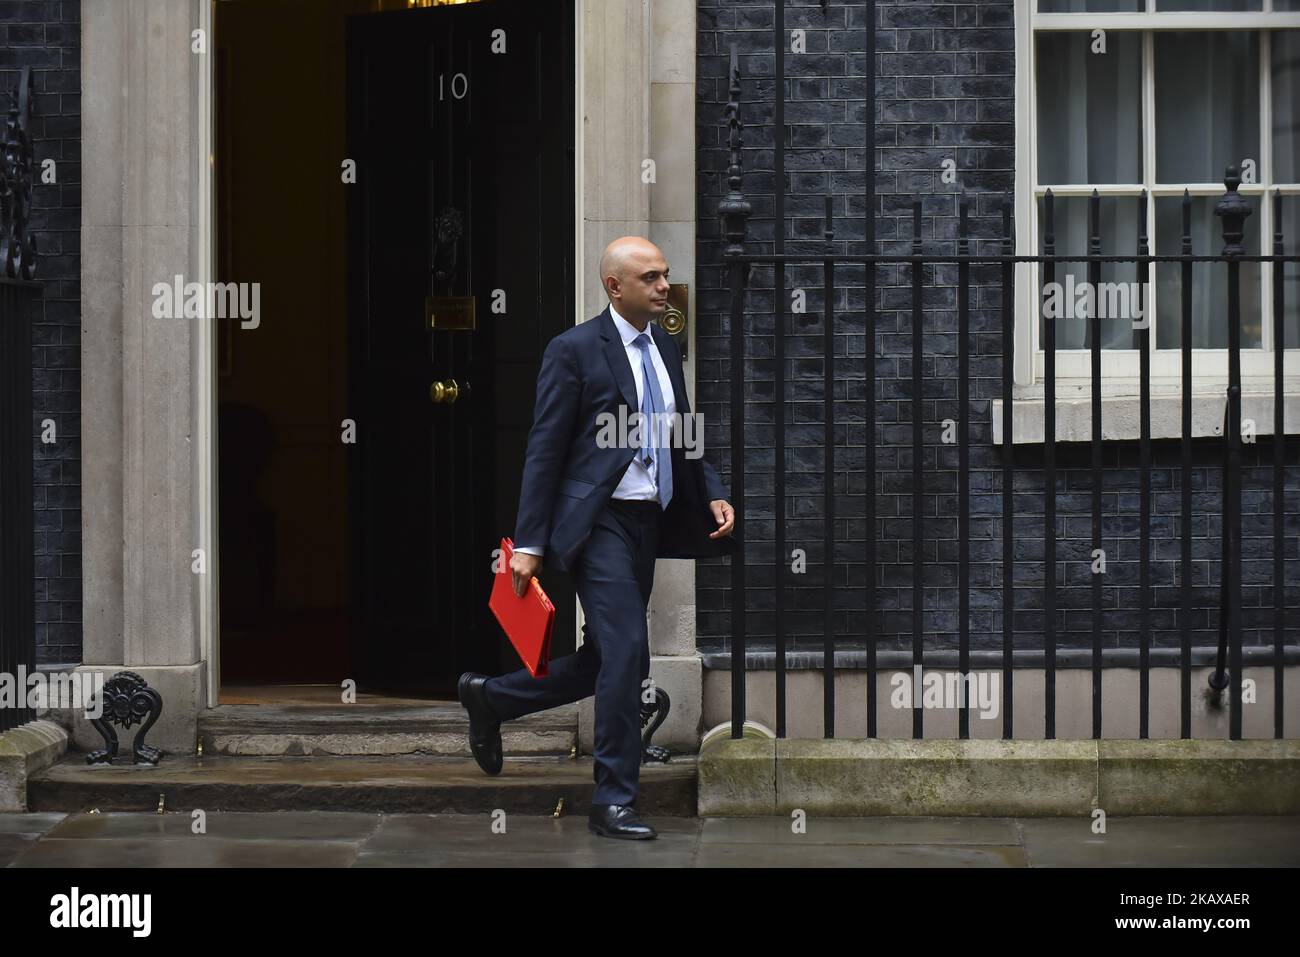 Britain's Secretary of State for Housing, Communities and Local Government Sajid Javid leaves 10 Downing Street after attending the weekly Cabinet Meeting, London on March 27, 2018. Prime Minister Theresa May is facing another Brexit hurdle after the opposition Labour Party announced its pushing for a legal commitment to avoid a hard border with Ireland after Britain leaves the European Union. The Migration Advisory Committee (MAC) said businesses are concerned about their ability to recruit workers from the EU after Britain leaves the EU. UK employers also see EU workers as 'more reliable' an Stock Photo